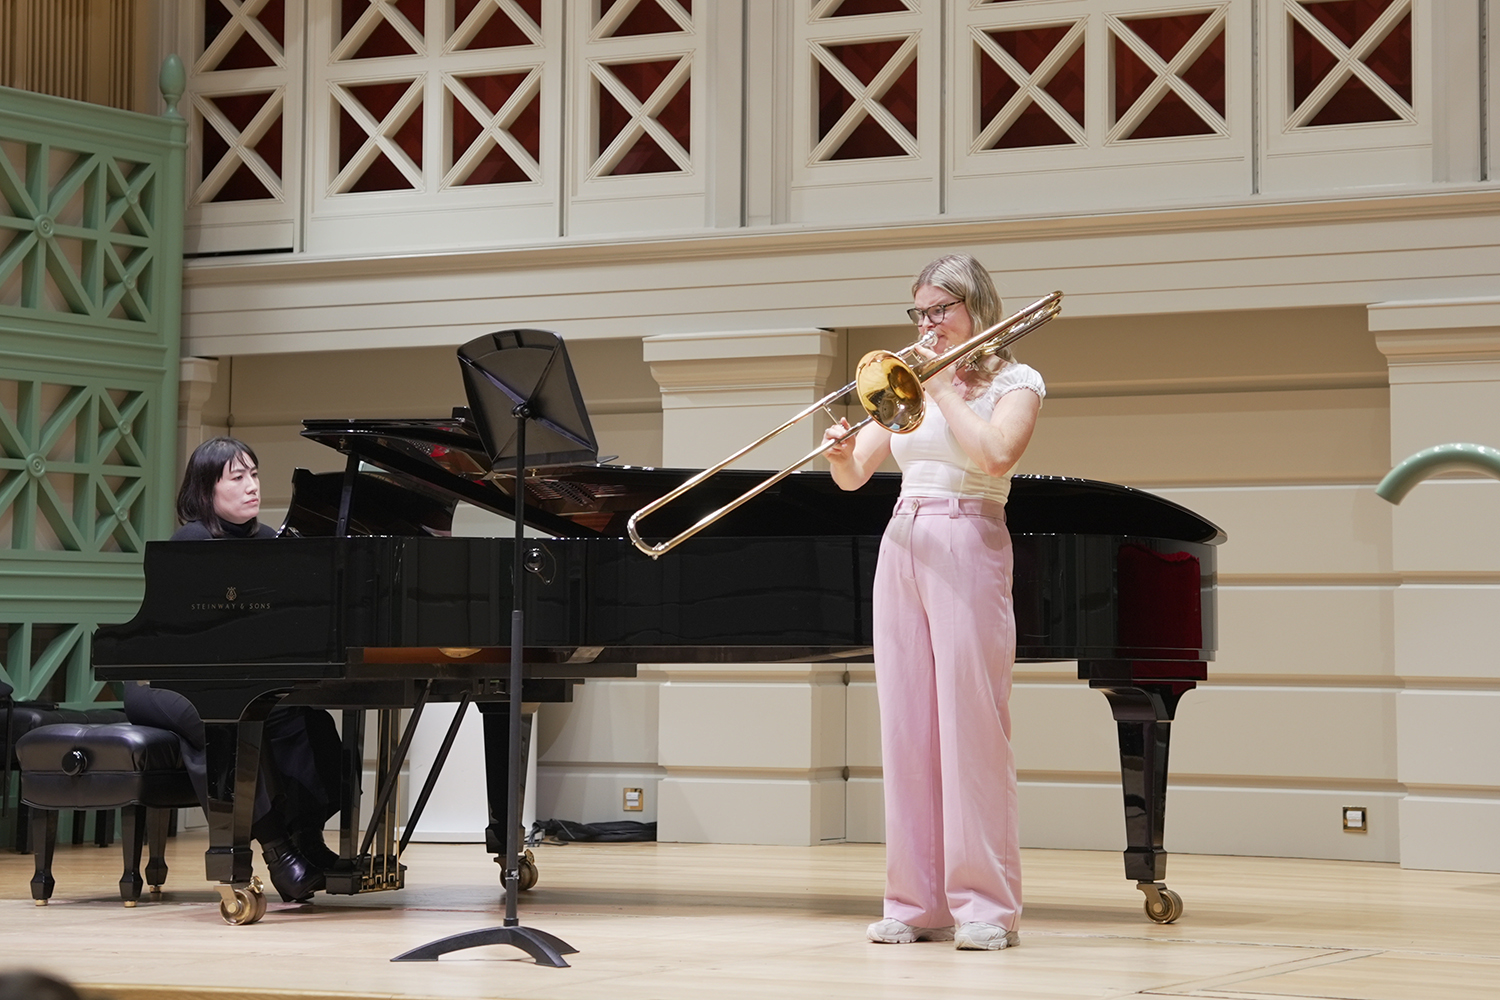 A trombonist wearing light pink trousers performing in the Performance Hall with a pianist accompaniment